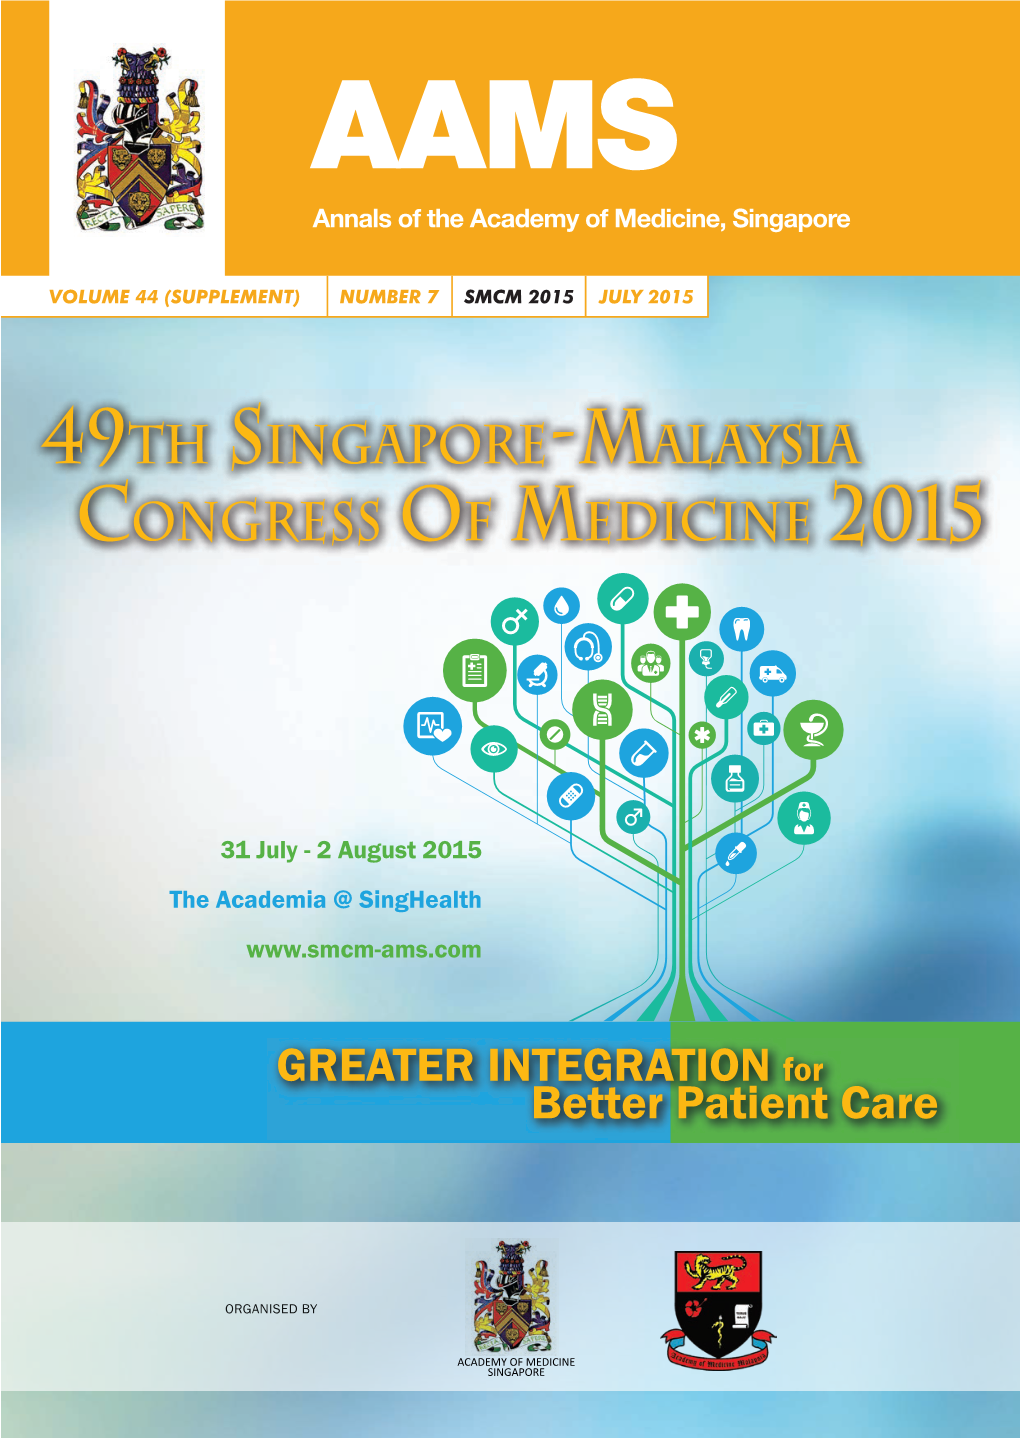 31 July - 2 August 2015 the Academia @ Singhealth